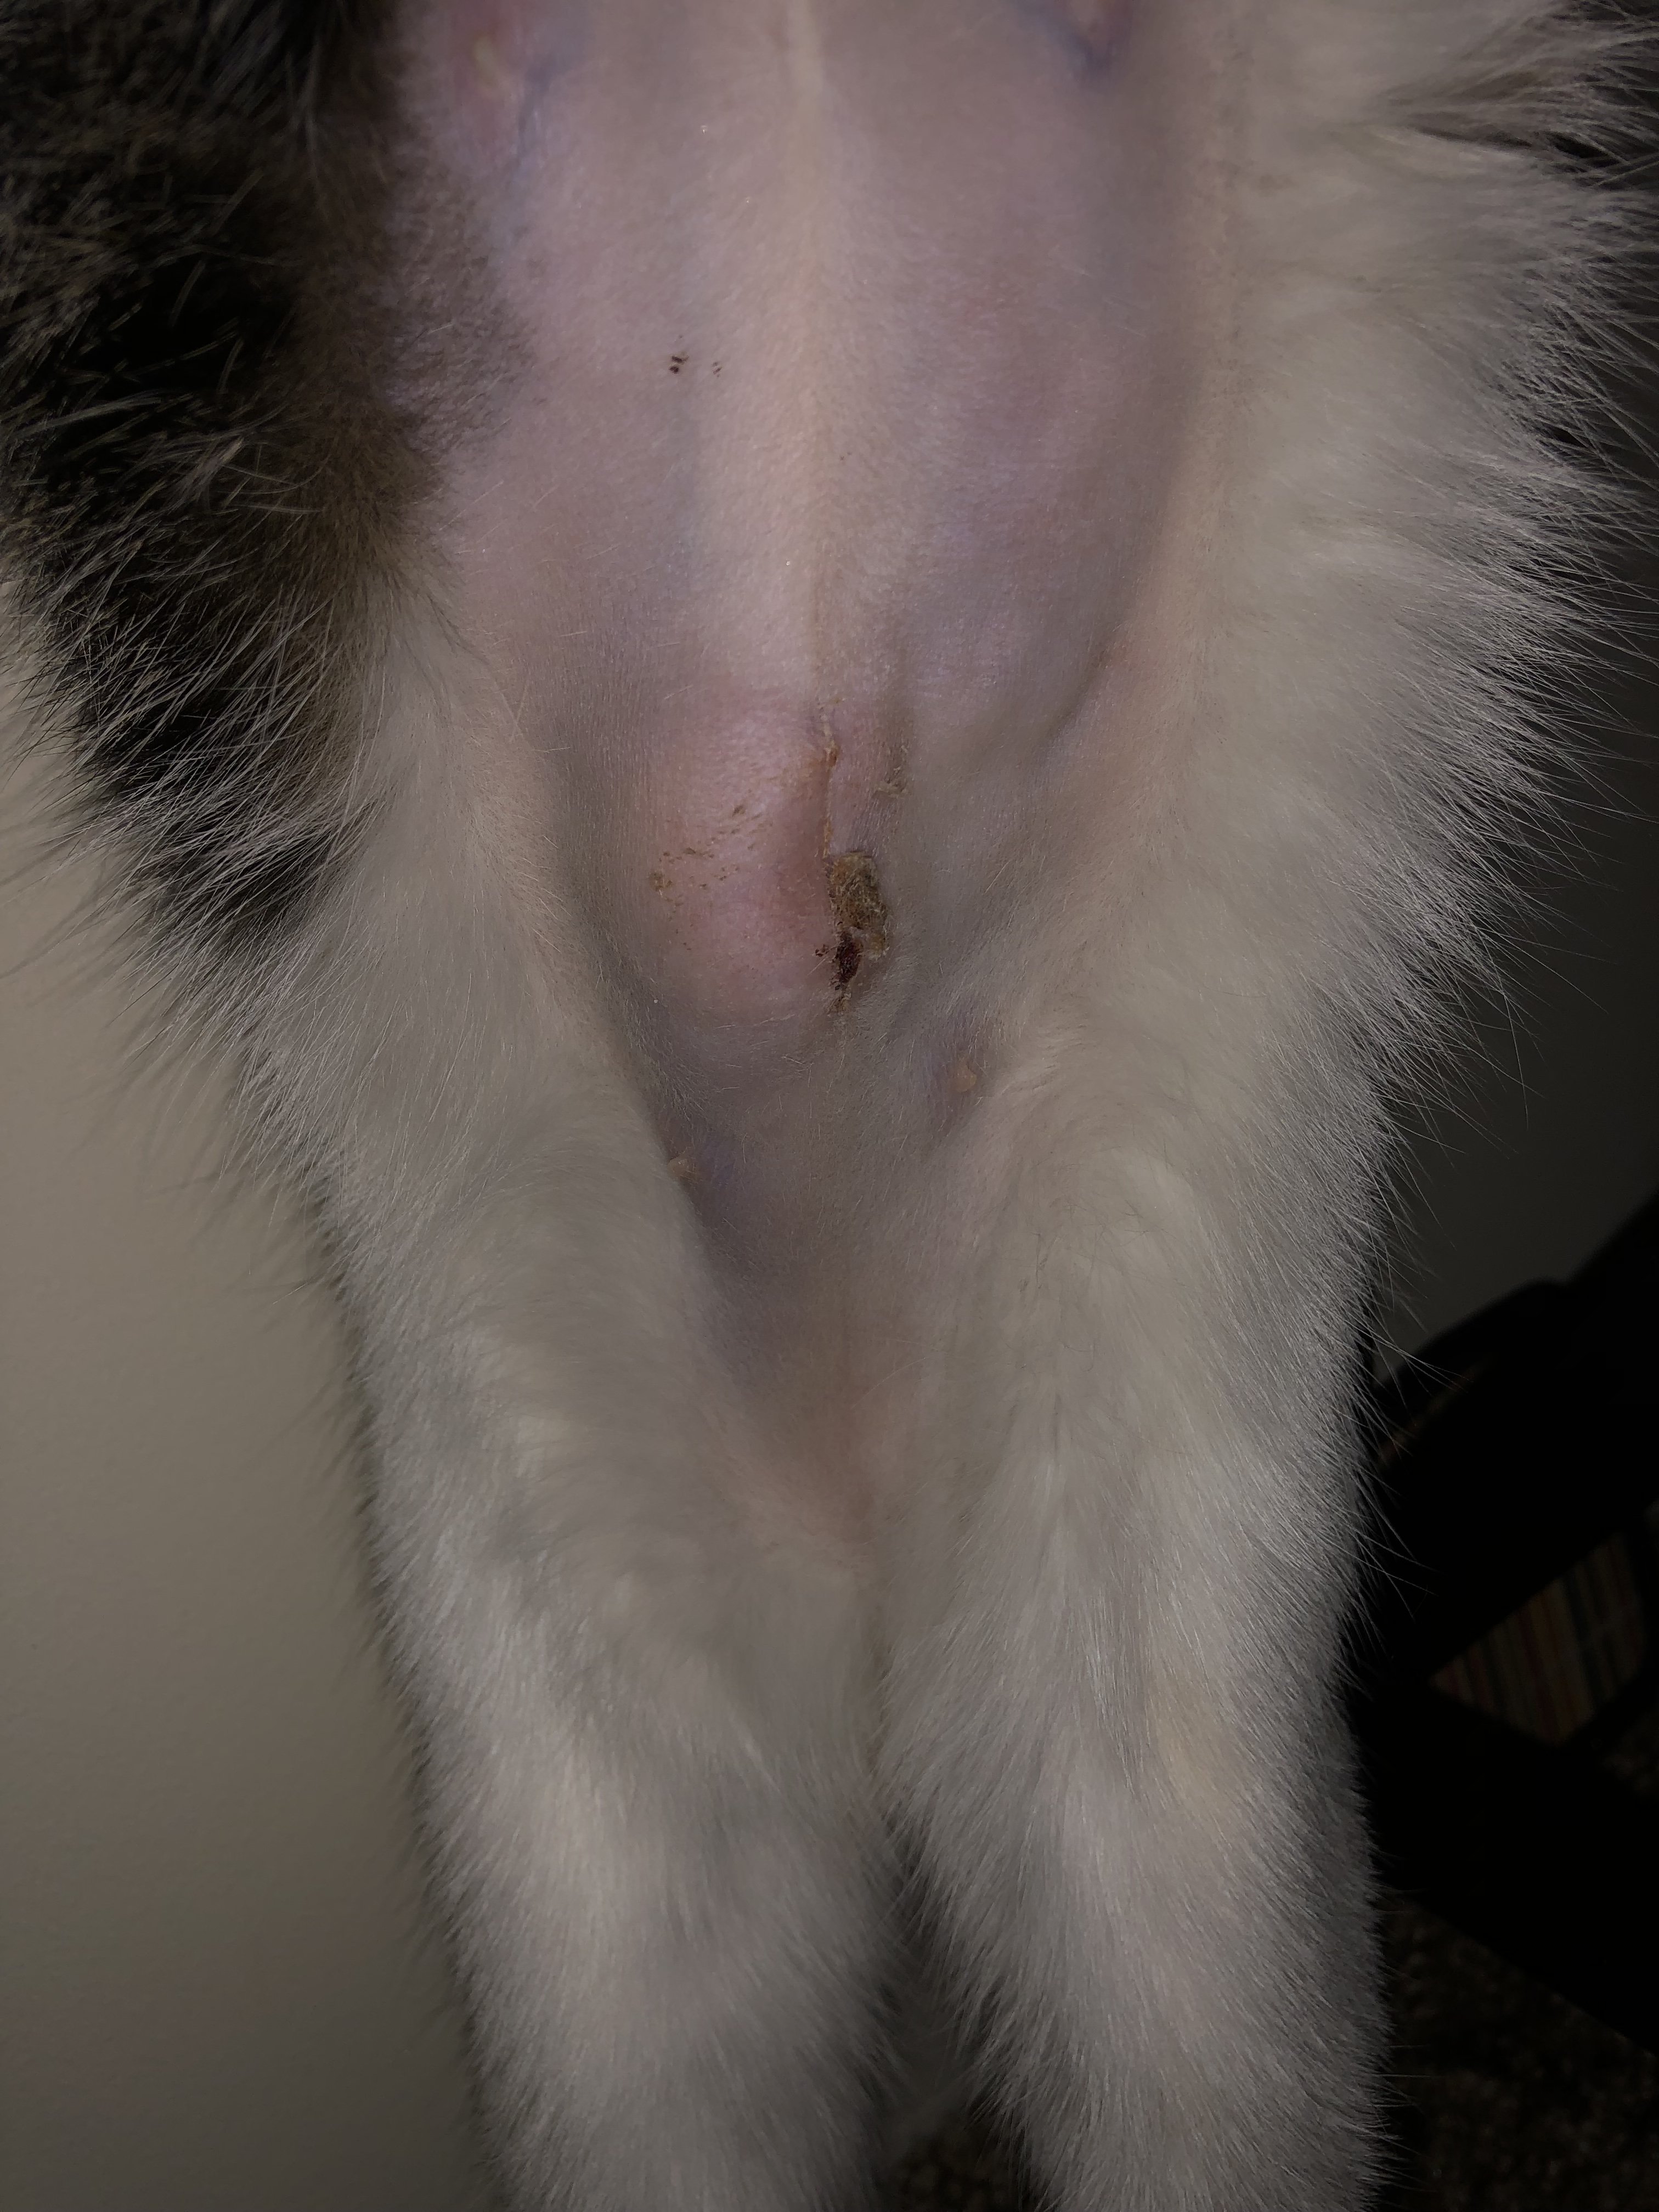 Is My Cats Incision Healing Properly? TheCatSite